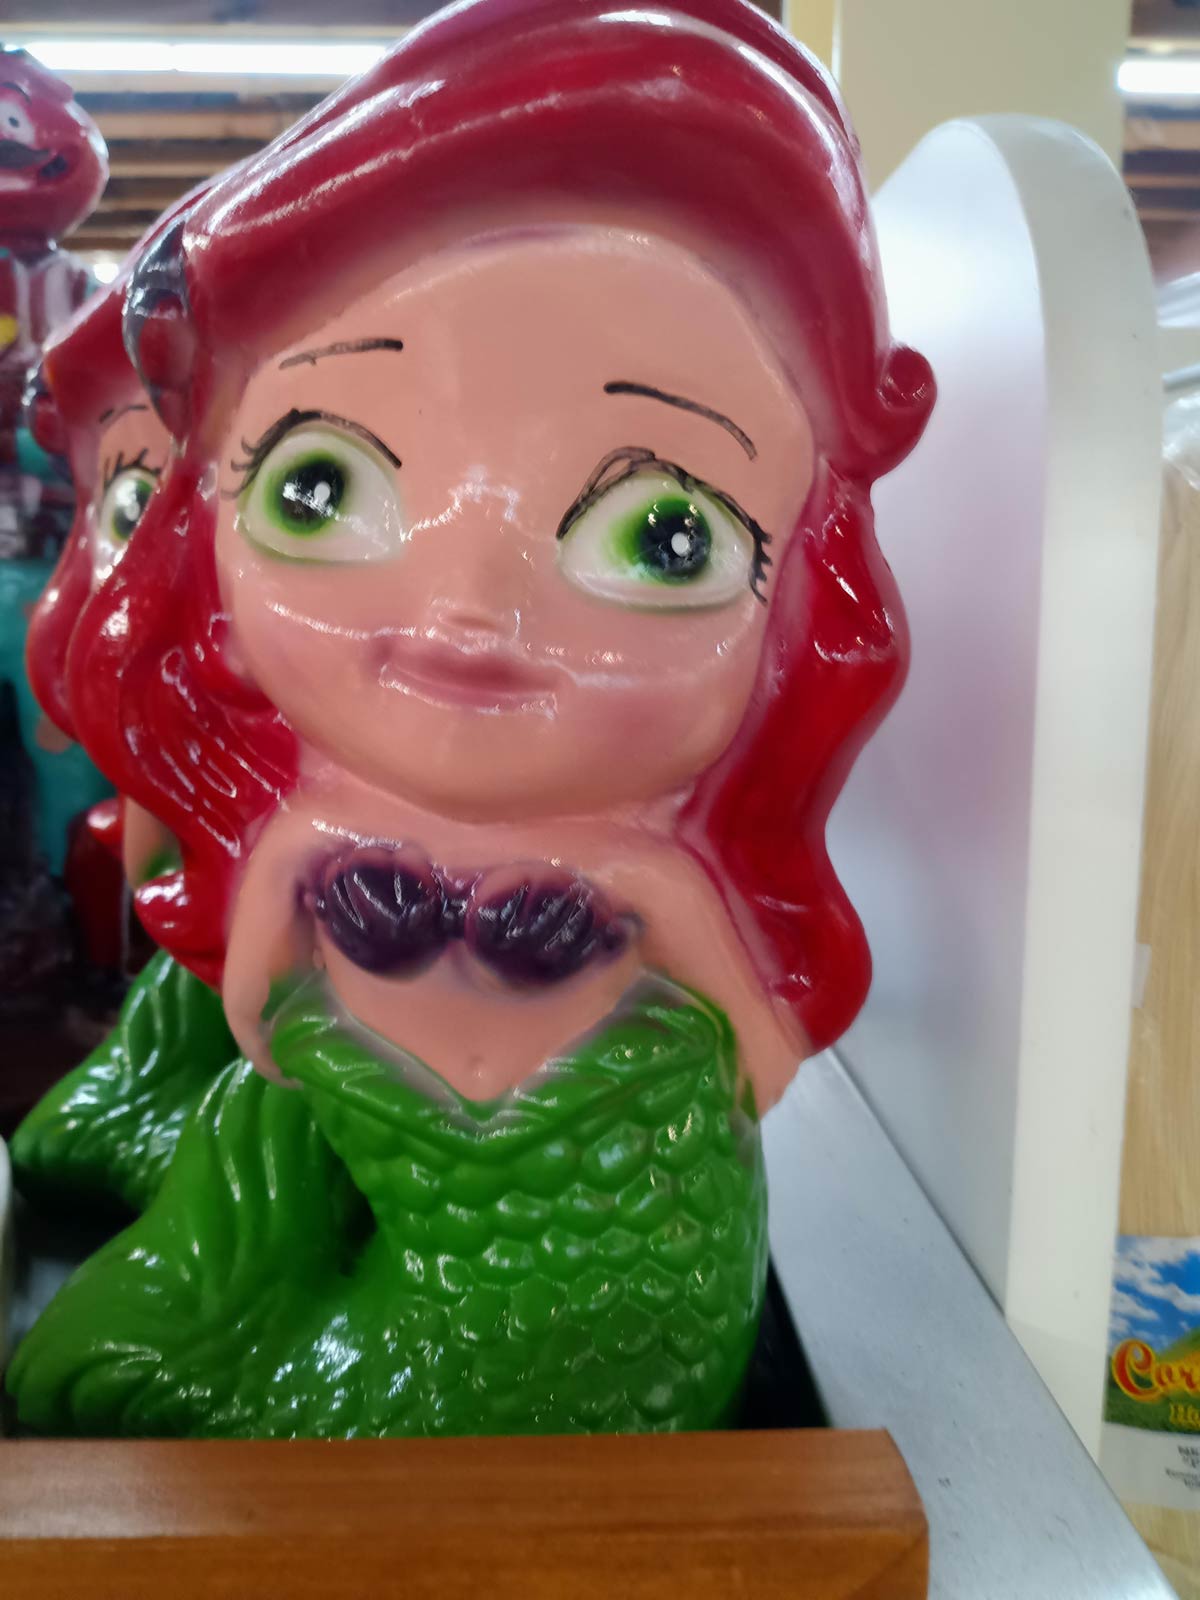 Ariel has seen some things